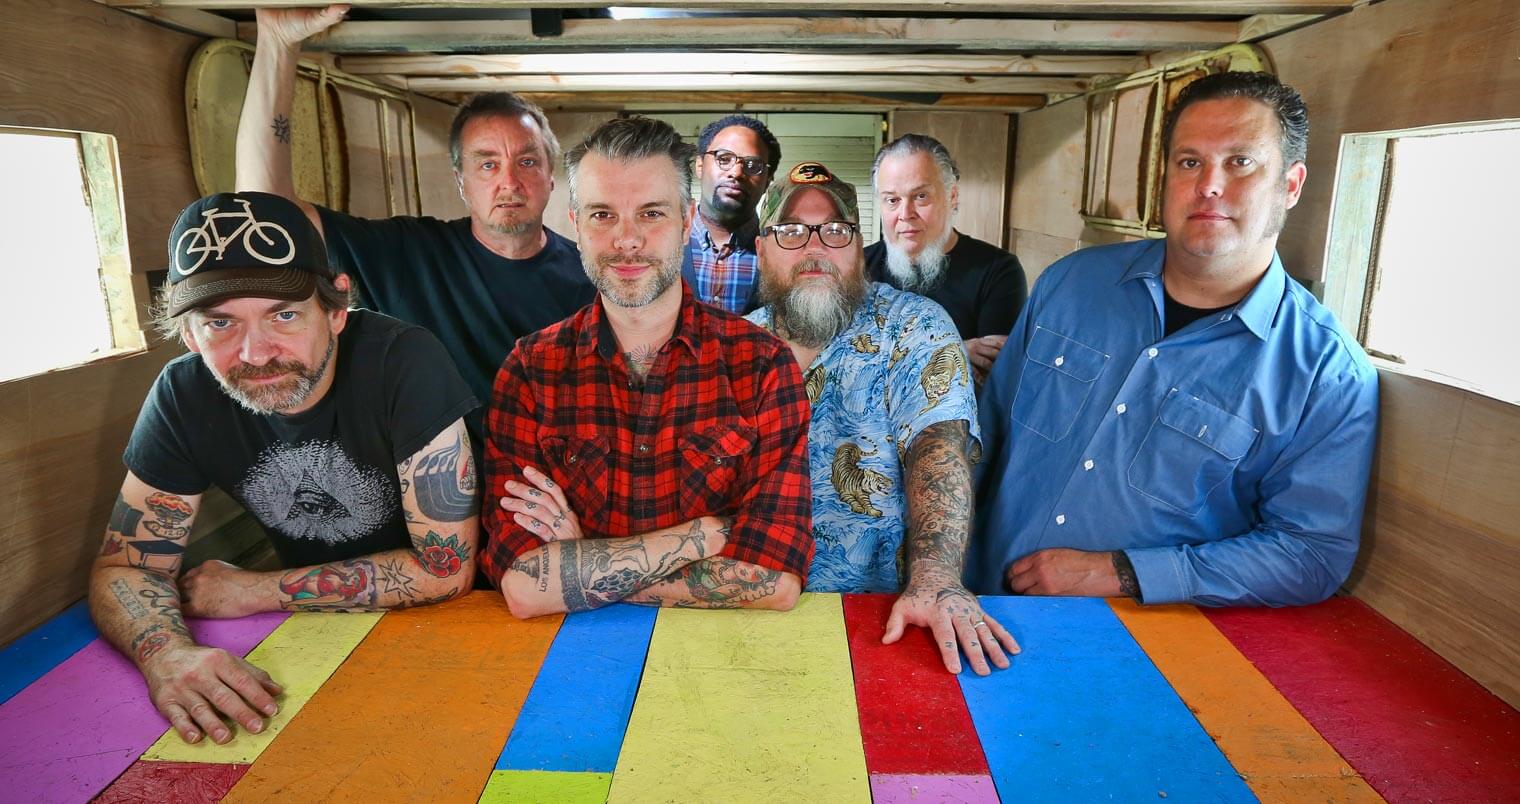 Sailor Jerry Launches Record Label Featuring Lucero's 'All Sewn Up' Single